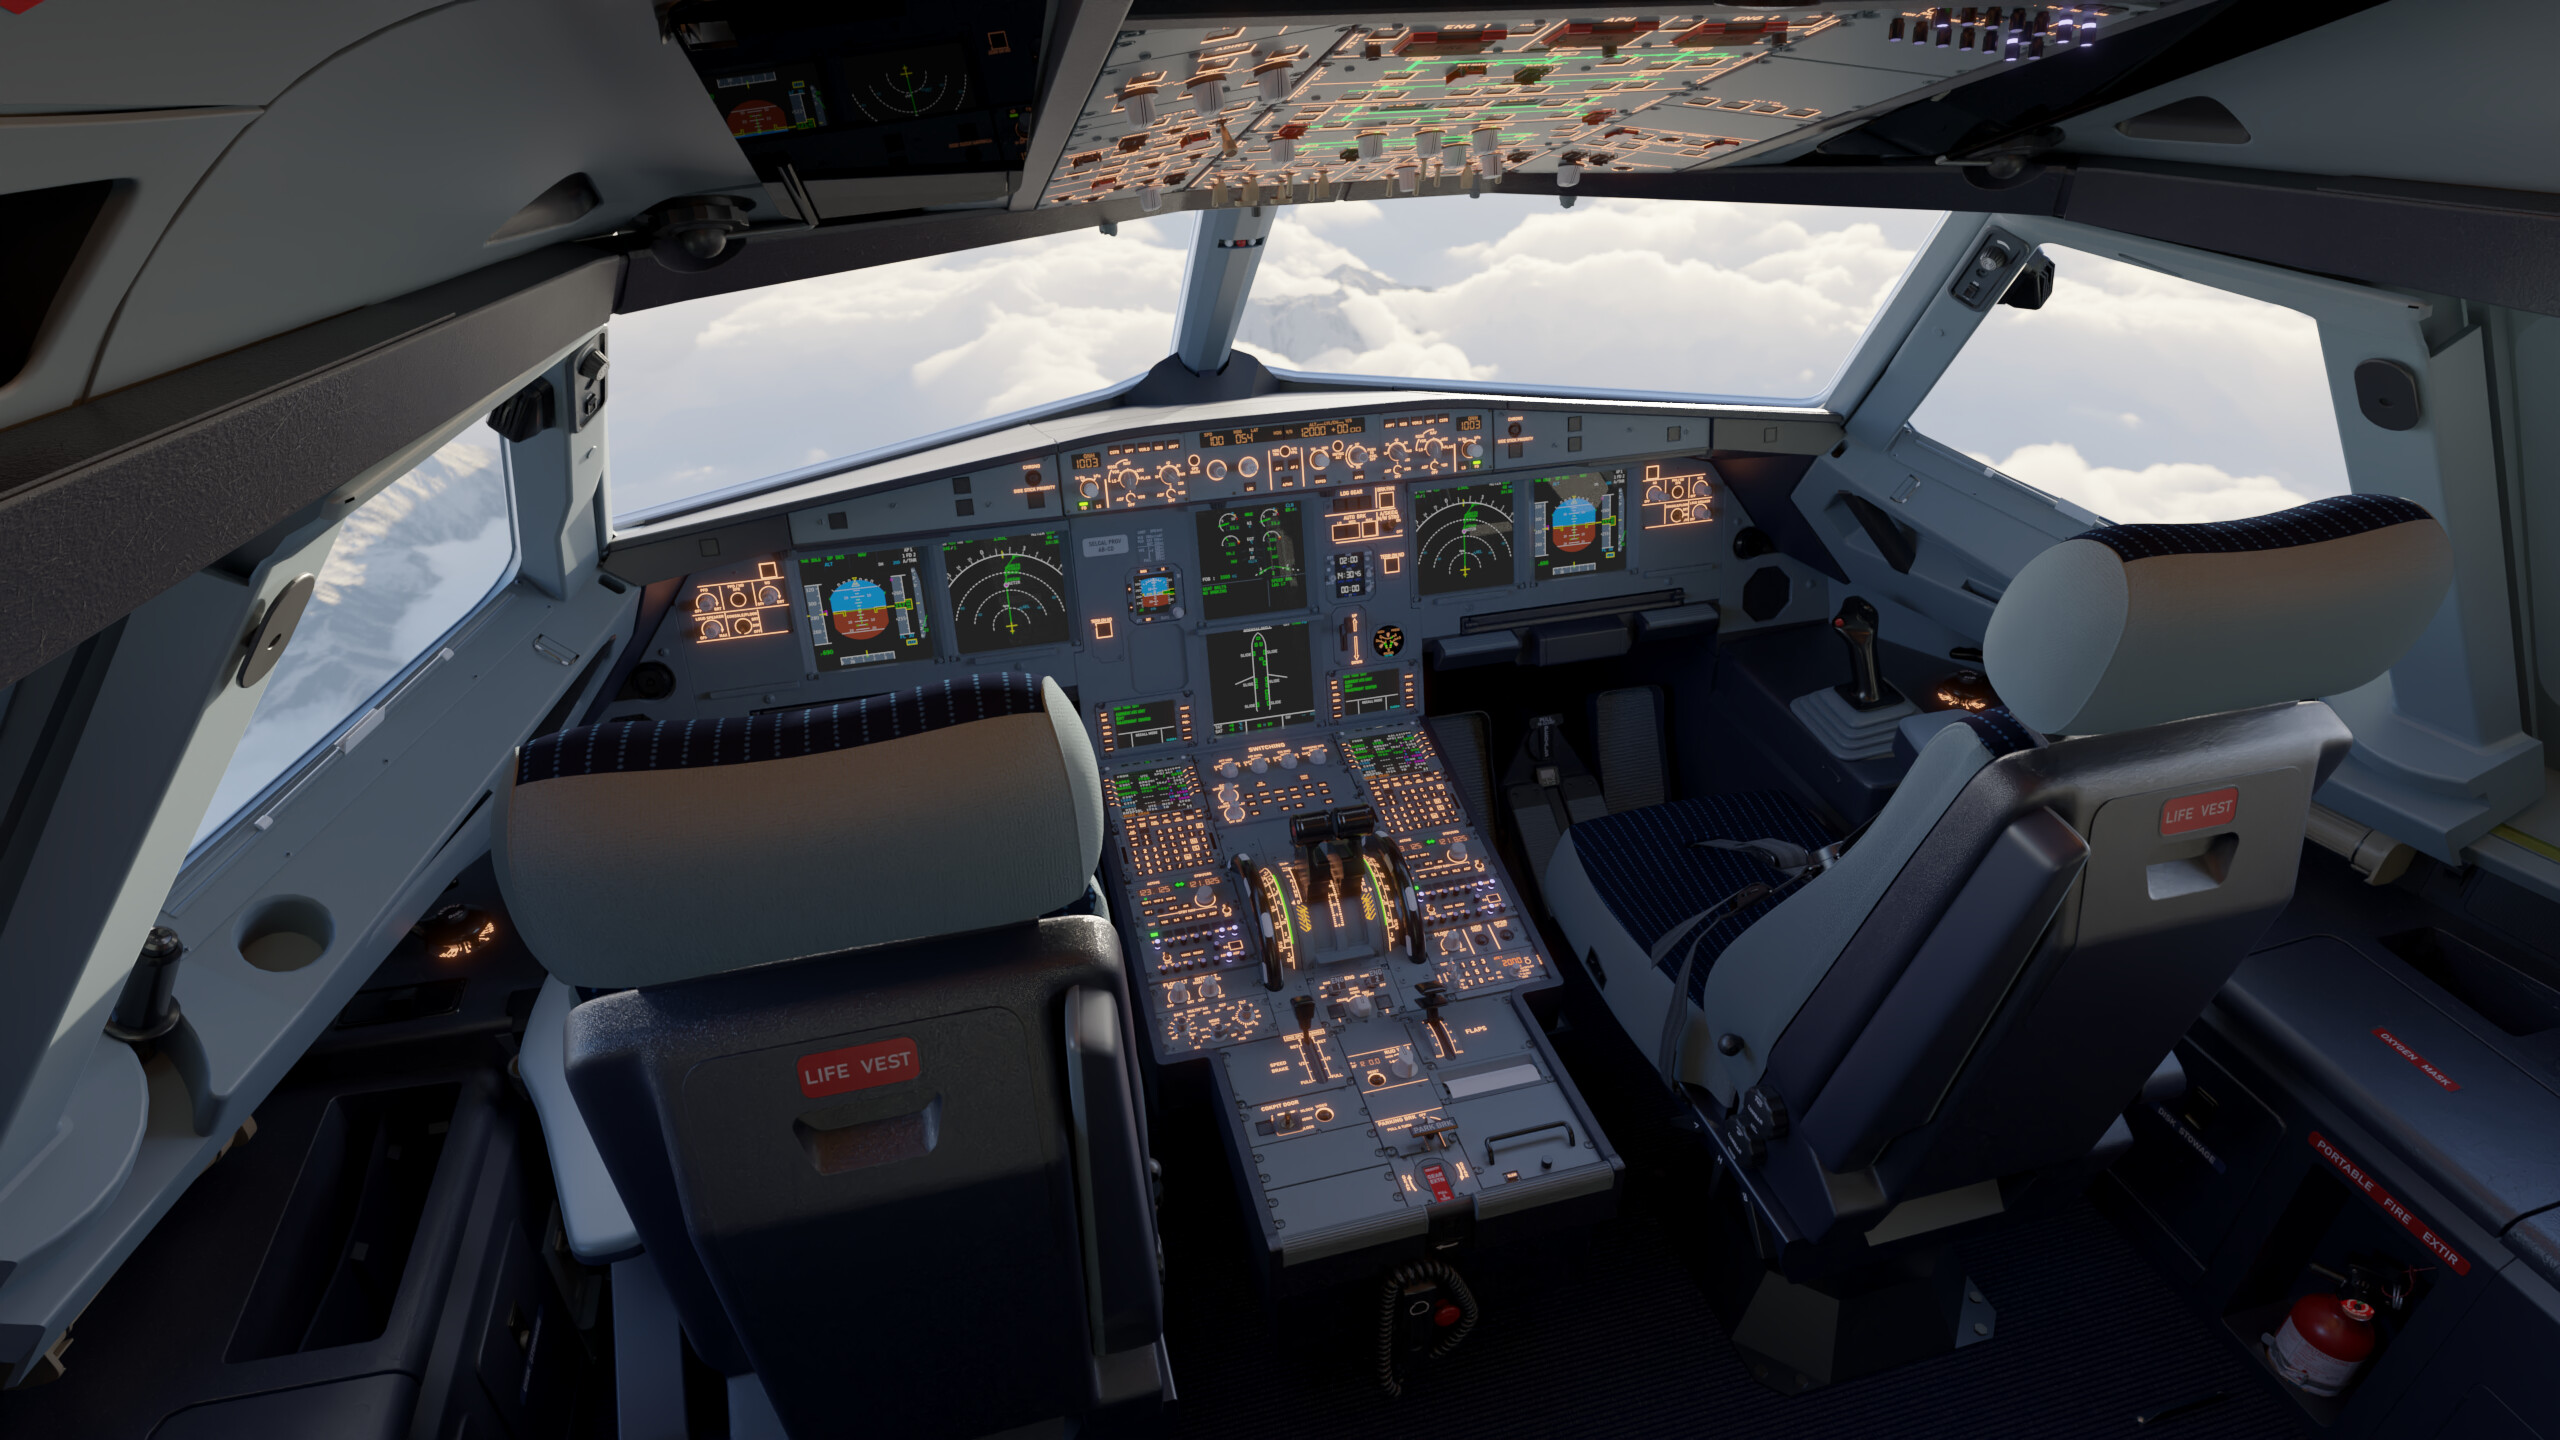 Airbus A Cockpit Interior Finished Projects Blender Artists